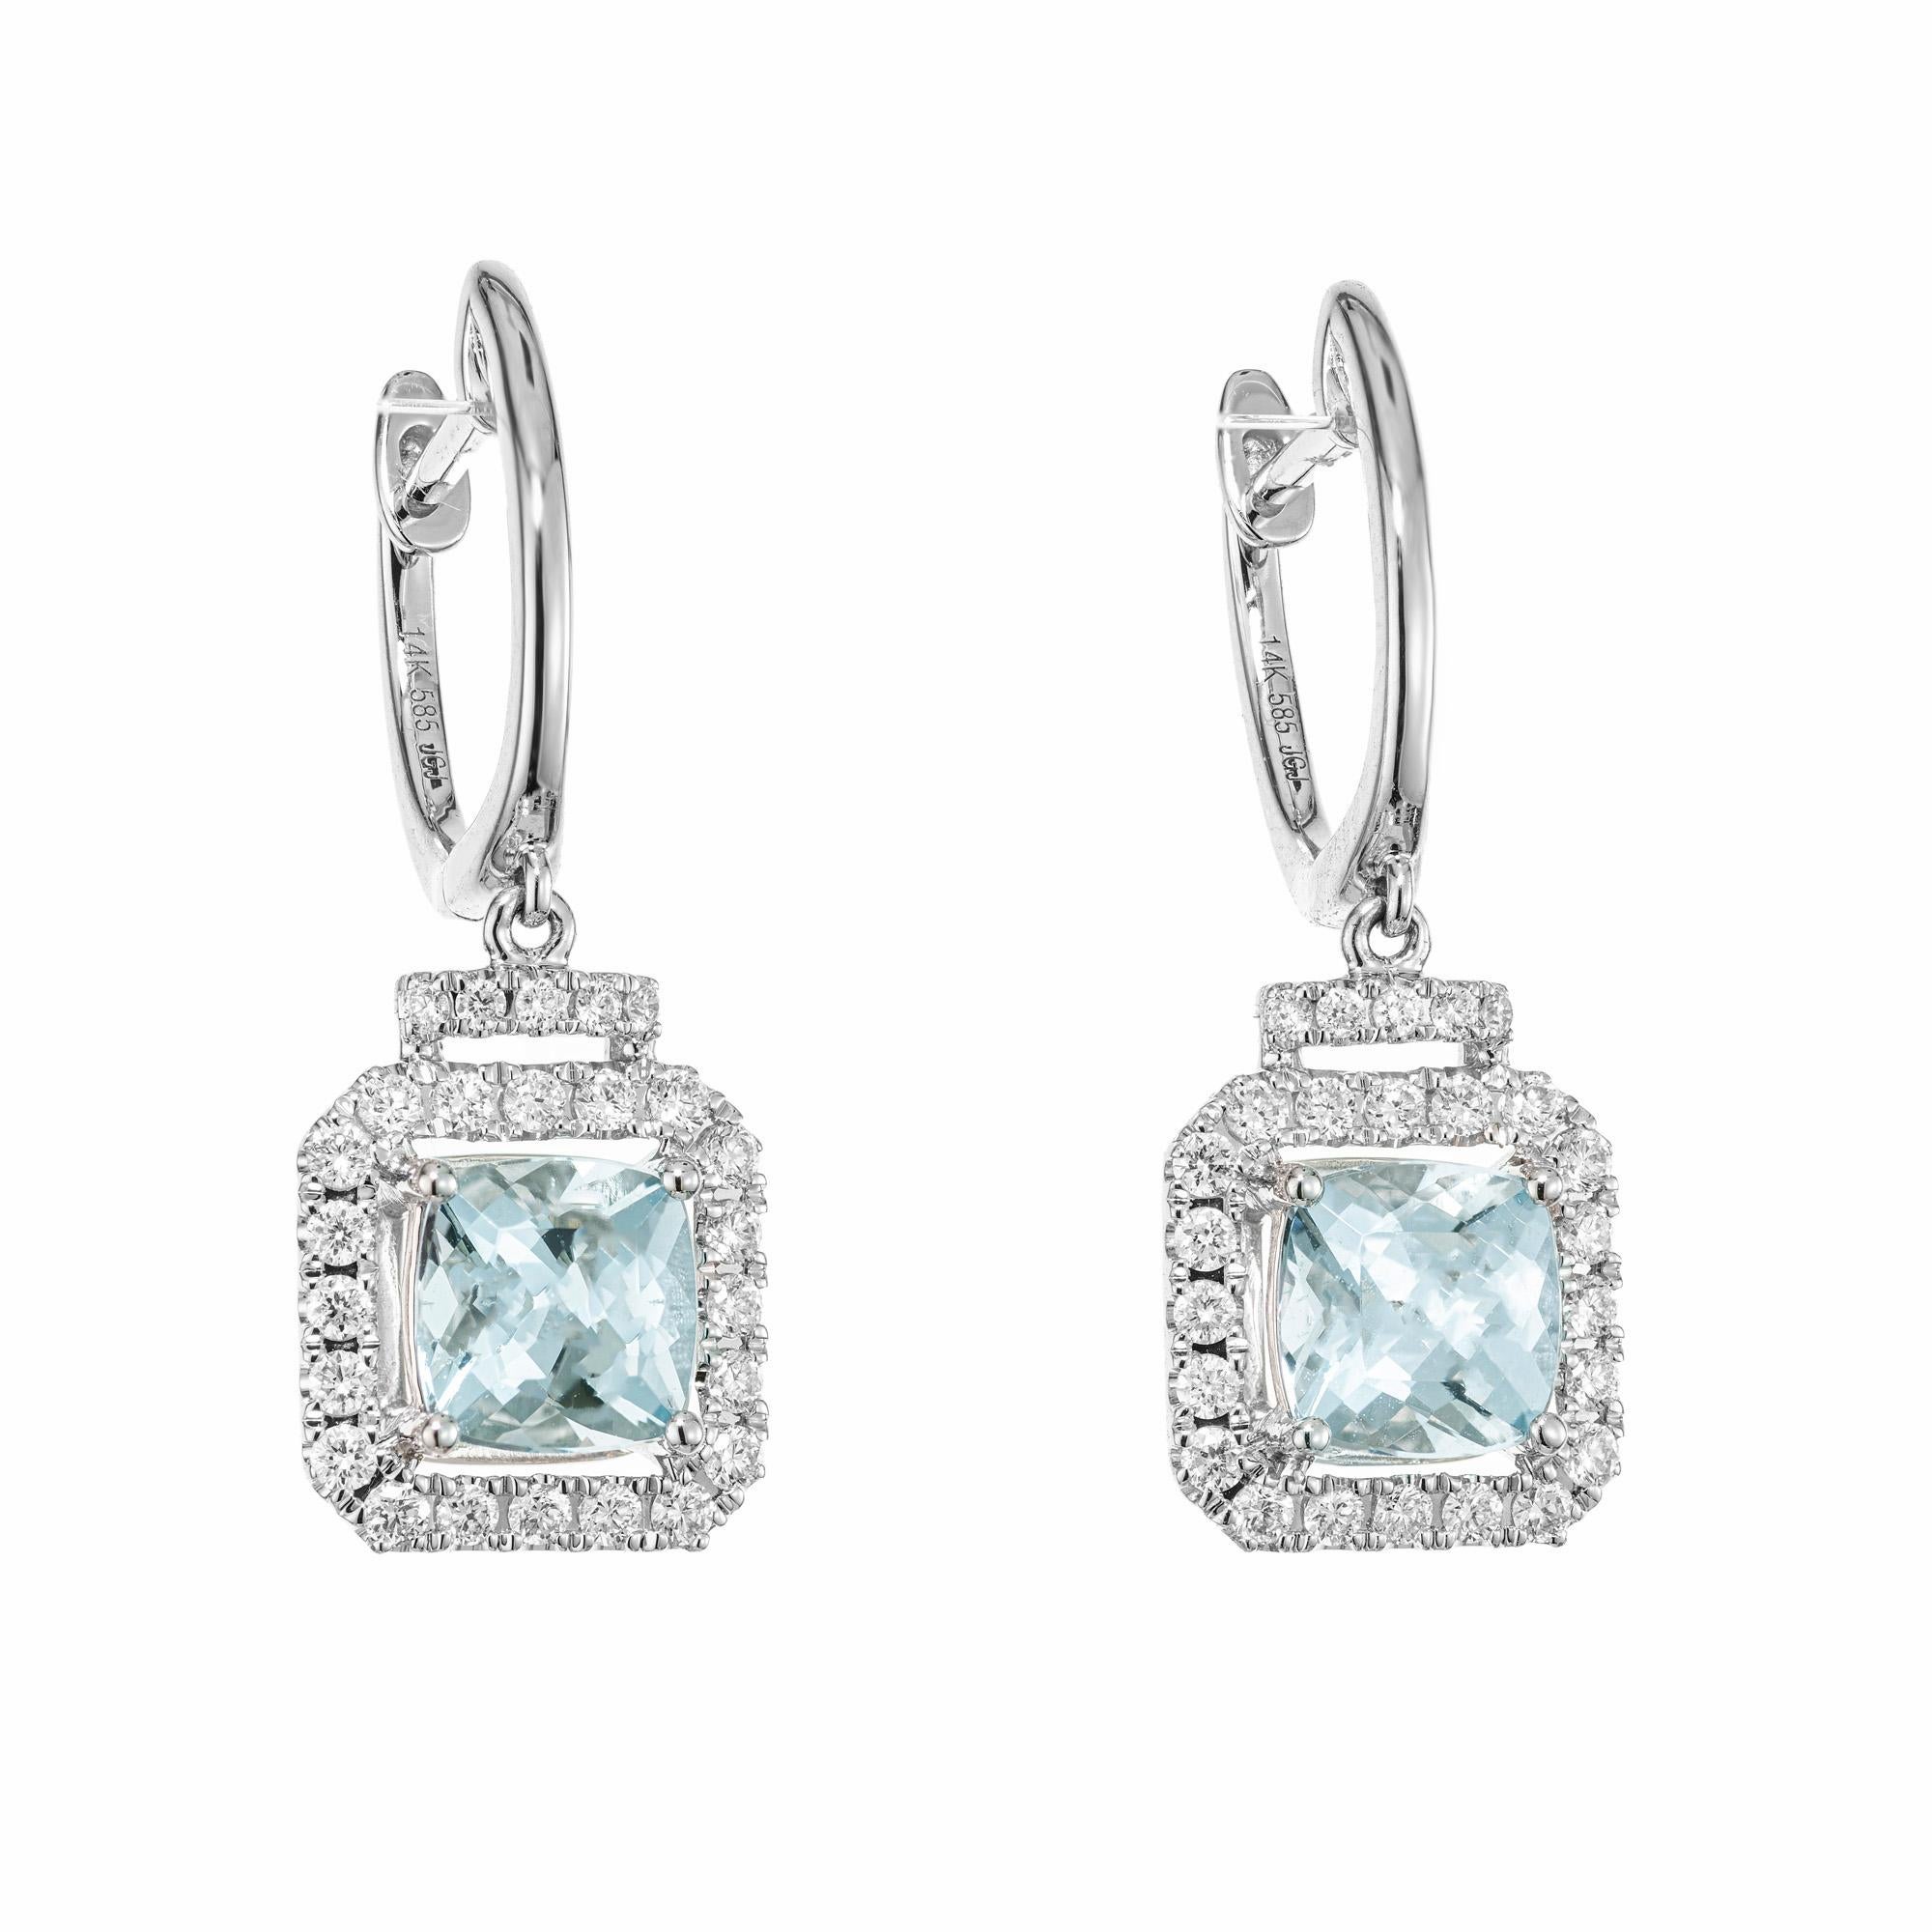 Radiant and elegant Aquamarine Diamond halo dangle earrings. 2 square shaped blue aqua gemstones with a total carat weight of 1.52cts. Each aqua has a halo of round brilliant cut diamonds. Crafted in 14k white gold. 

2 square blue aqua, approx. 